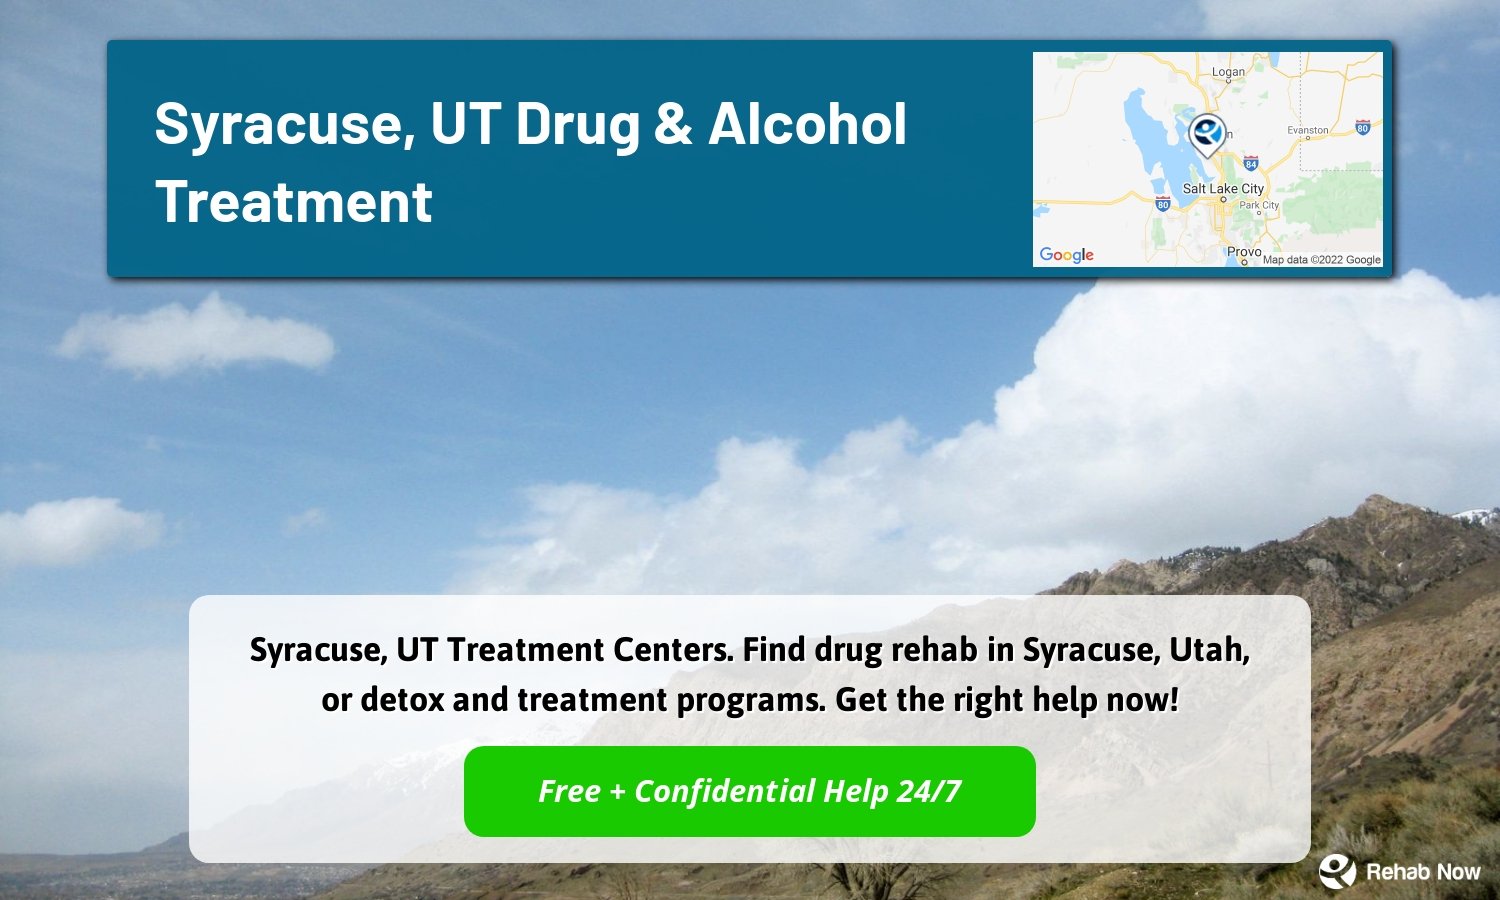 Syracuse, UT Treatment Centers. Find drug rehab in Syracuse, Utah, or detox and treatment programs. Get the right help now!